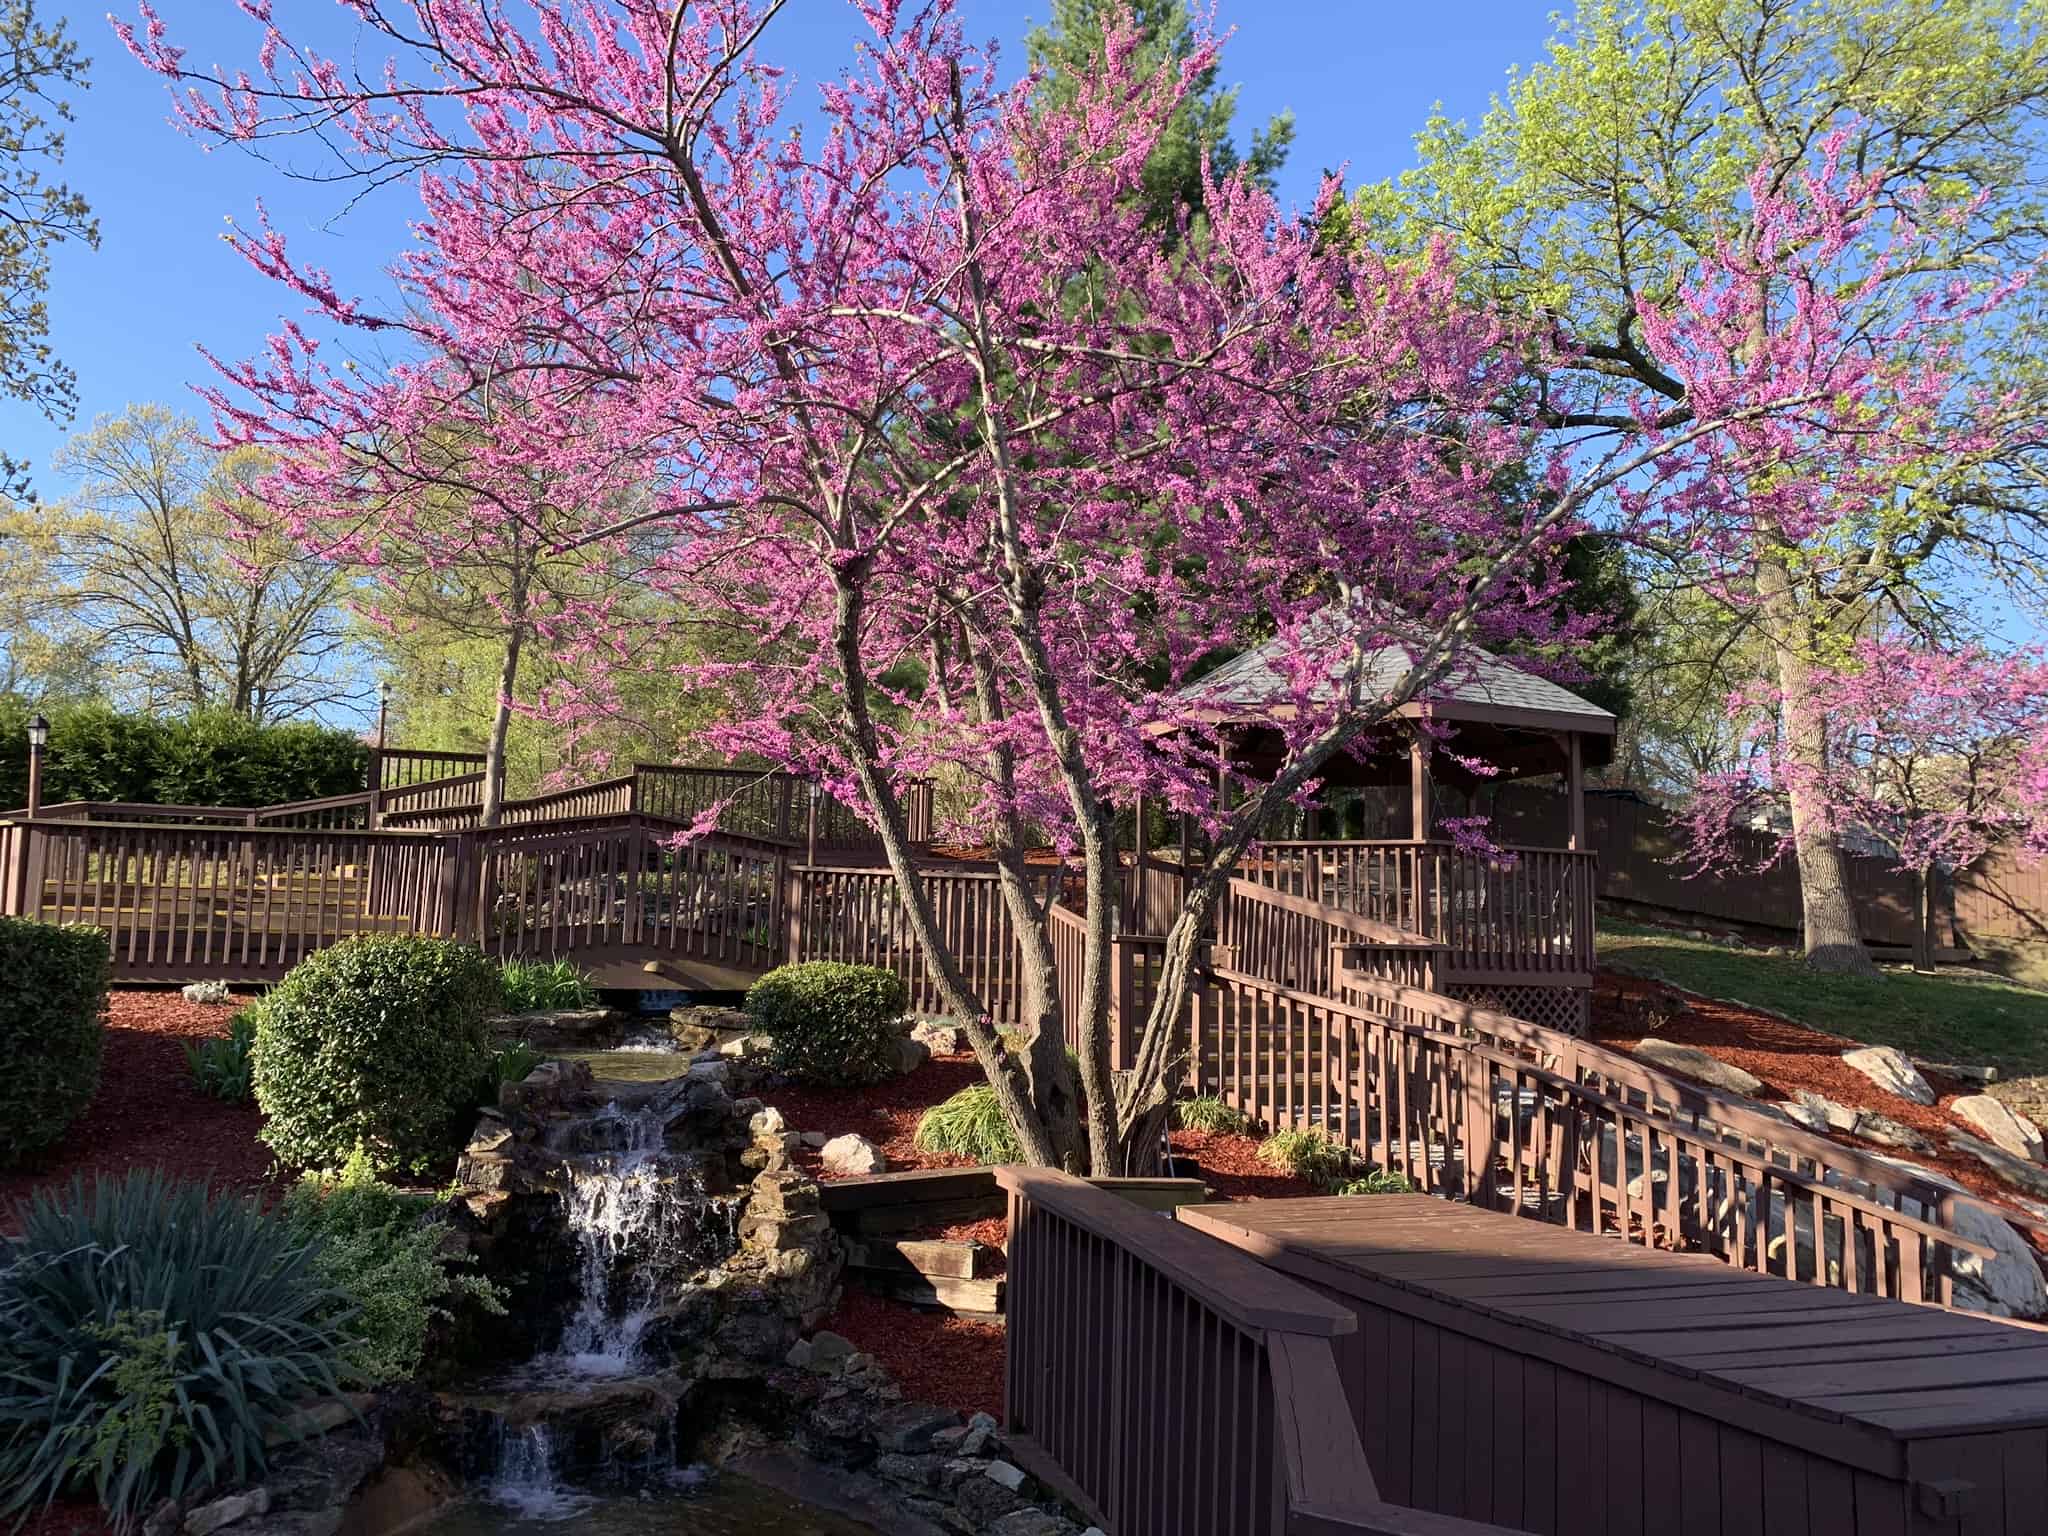 Redbud tree blooming and miracles